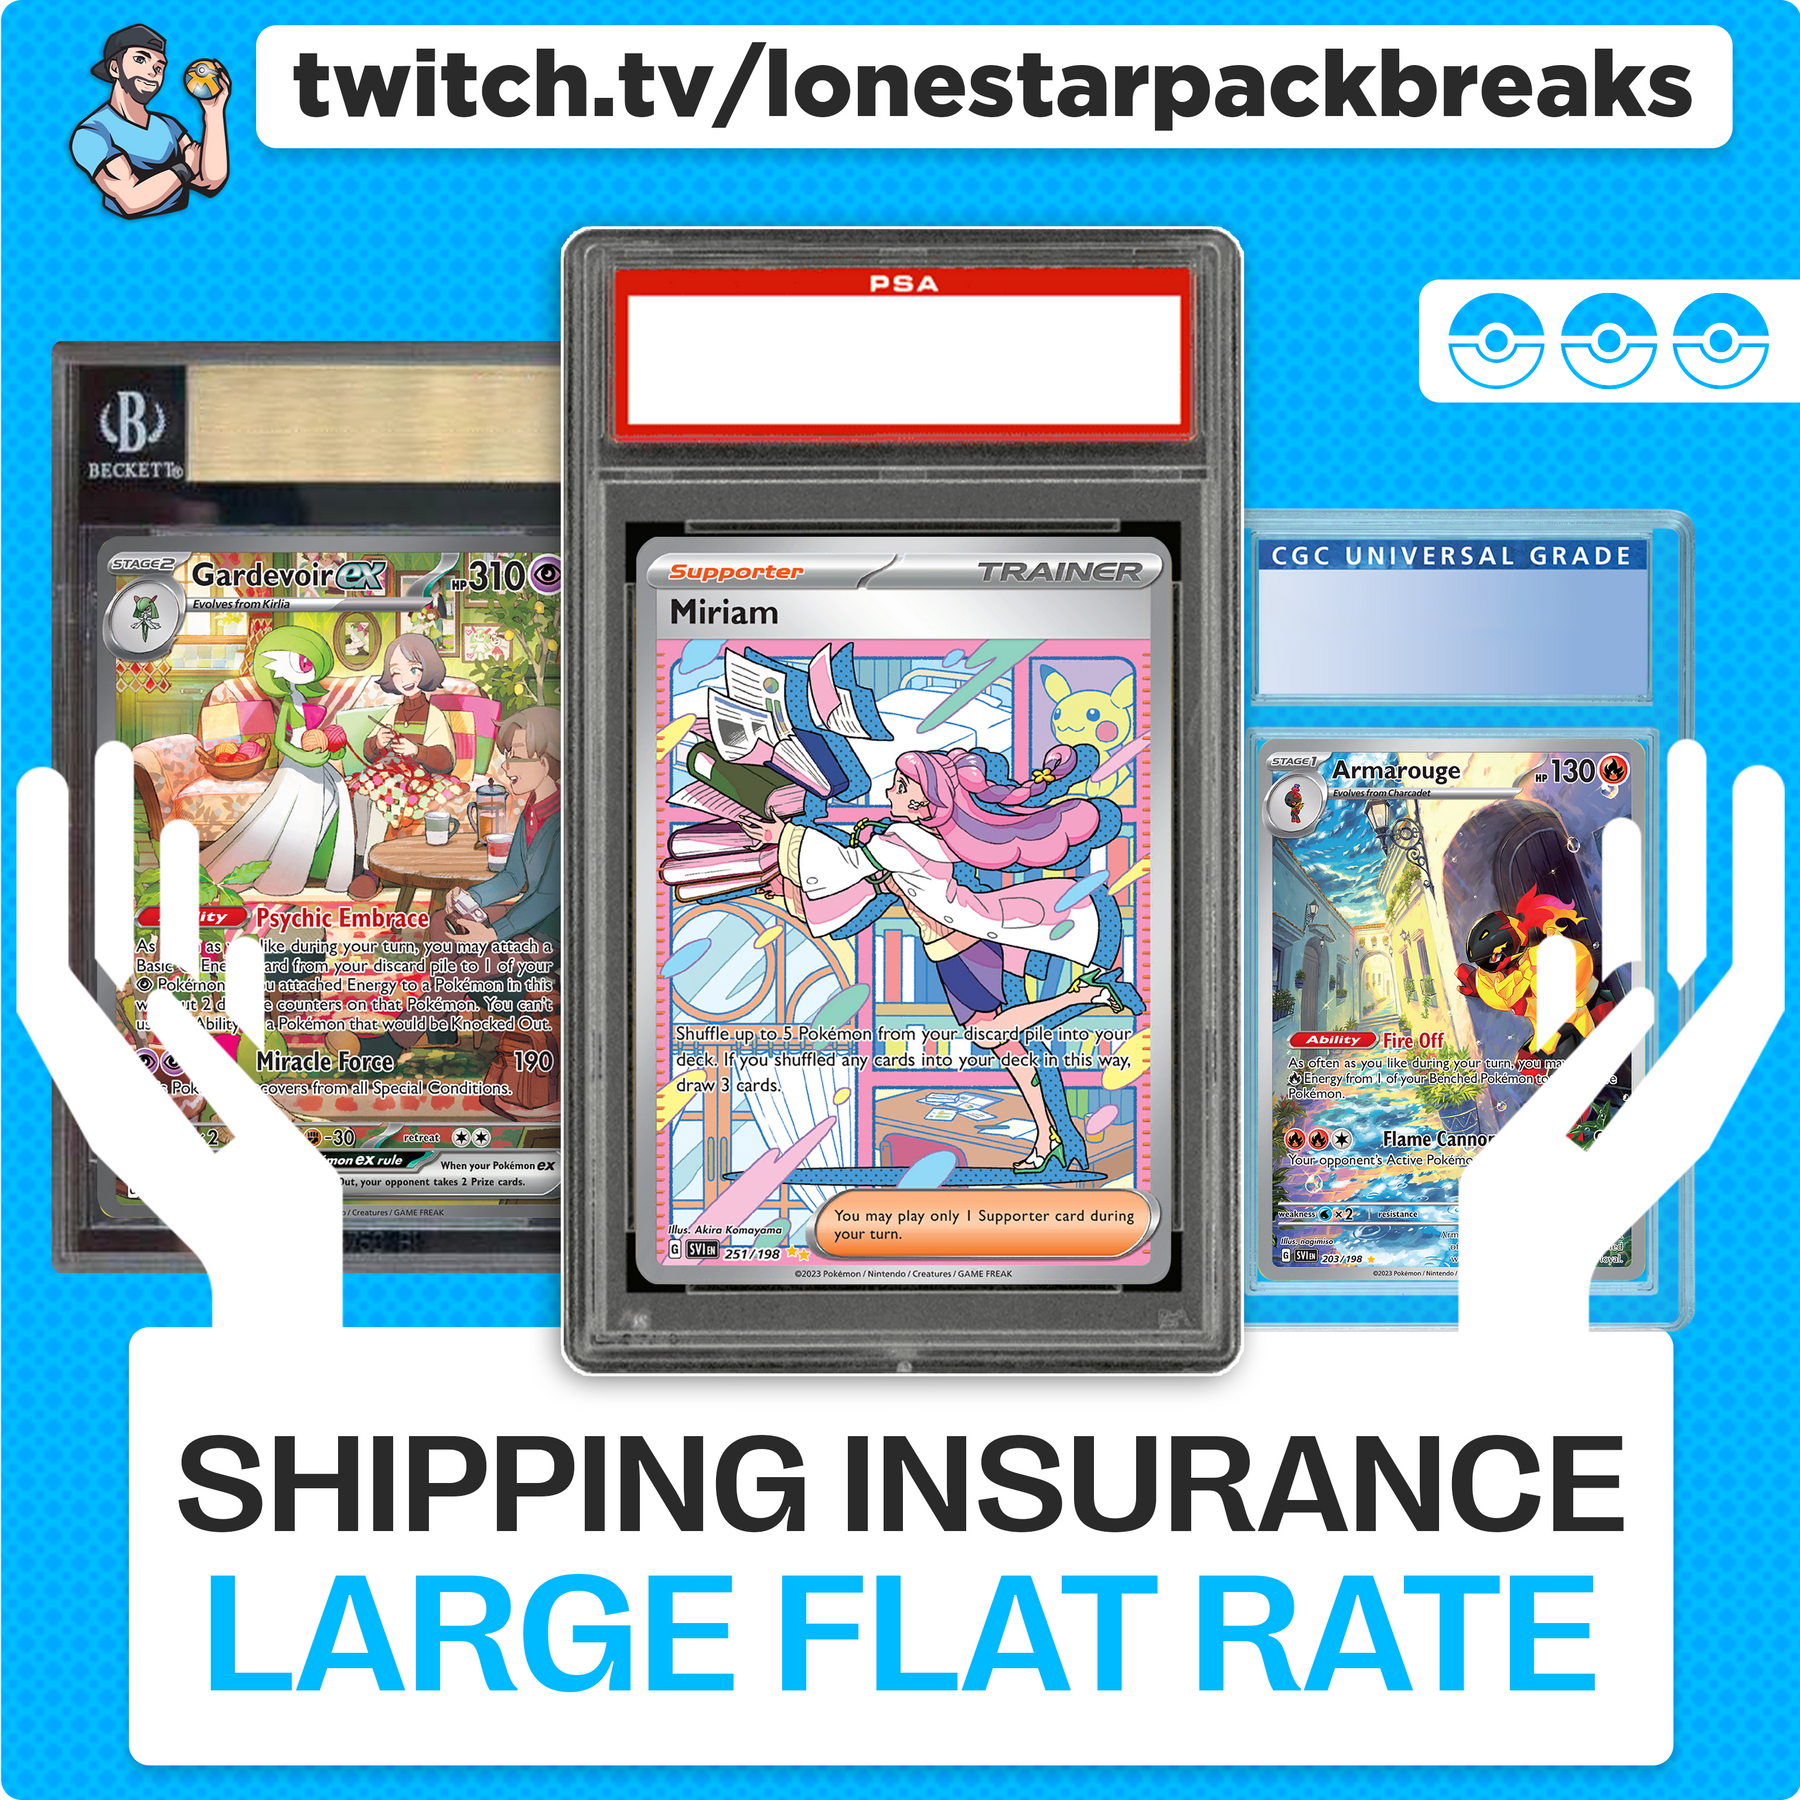 Shipping Insurance-Large Flate Rate (up to 60 breaks or 45 slabs)